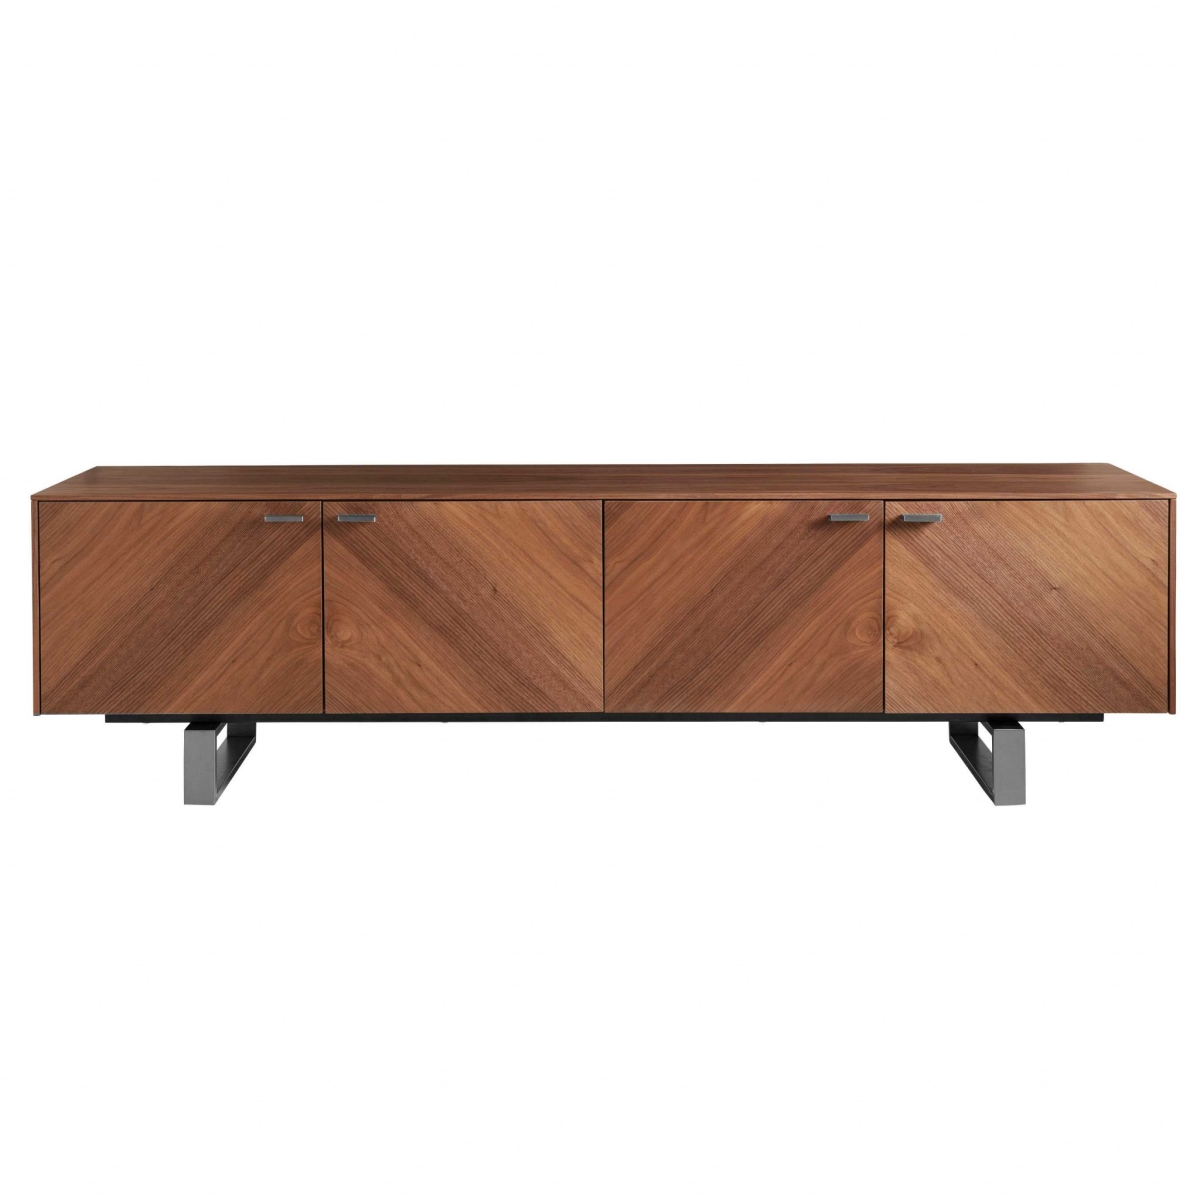 Picture of HomeRoots 370431 American Walnut Media Stand with Brushed Stainless Steel Base, 70.87 x 16.54 x 19.69 in.